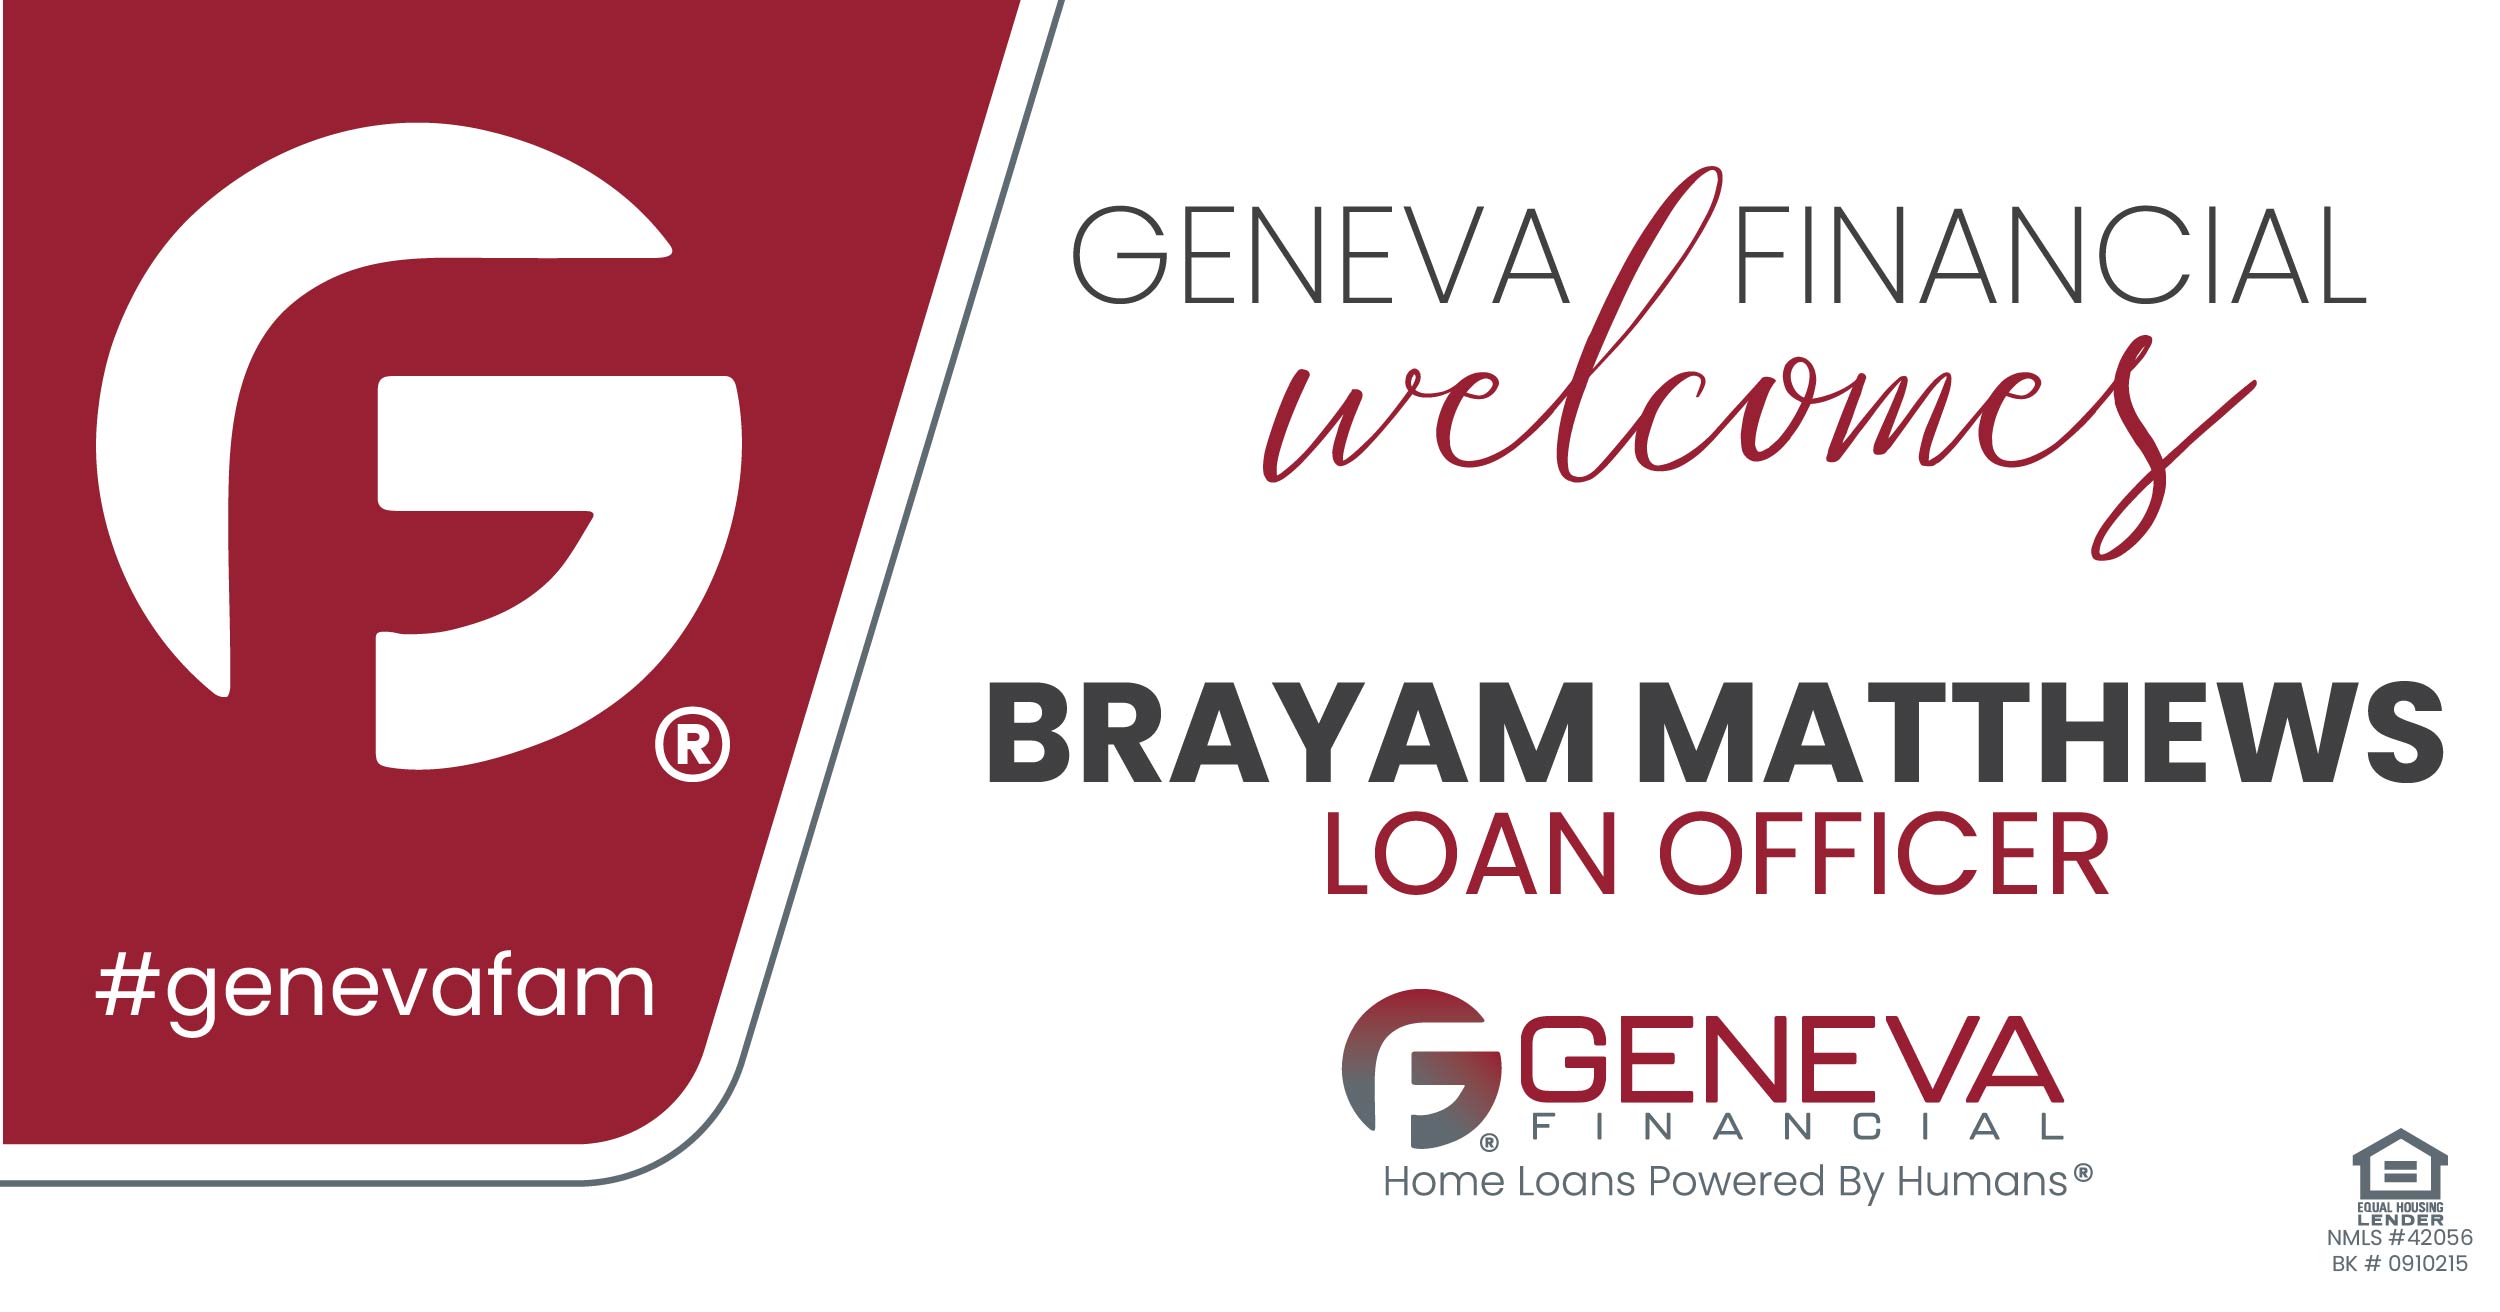 Geneva Financial Welcomes New Loan Officer Brayam Matthews to Shelbyville, Indiana – Home Loans Powered by Humans®.